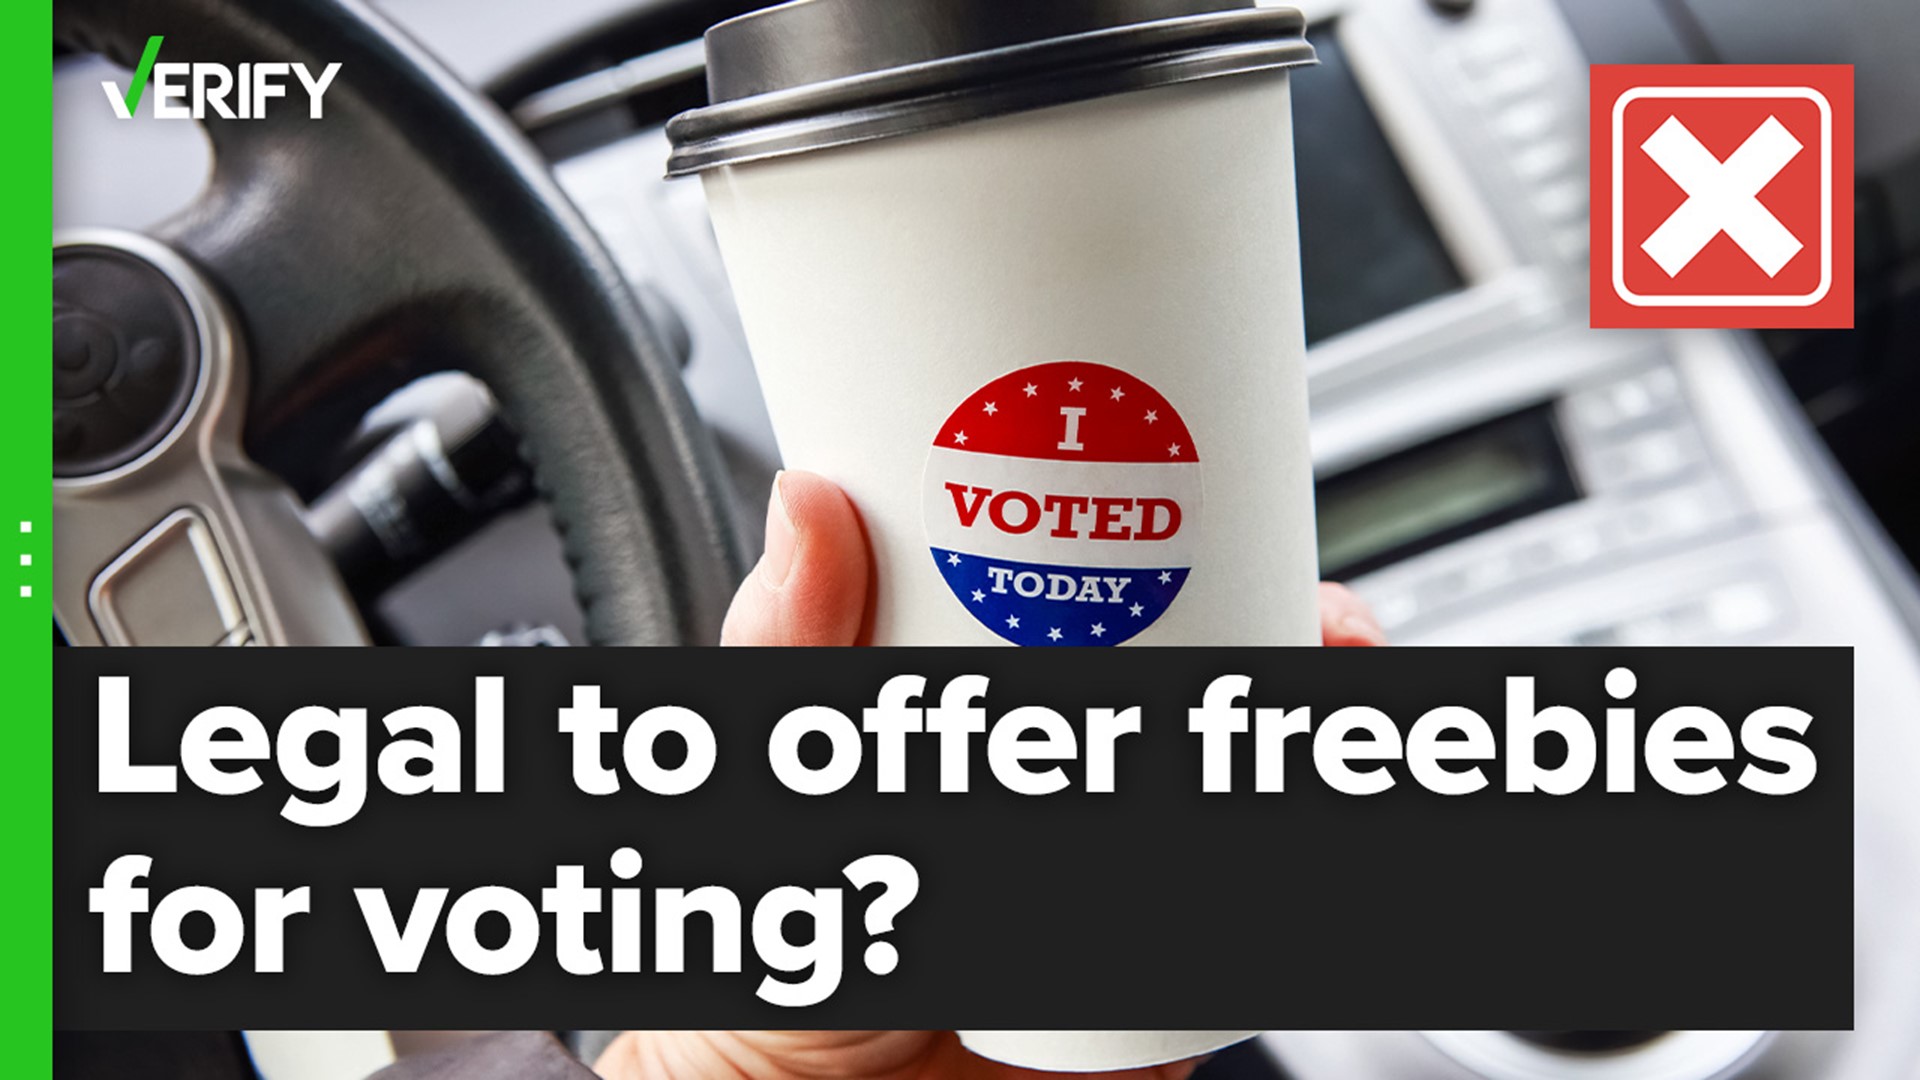 According to U.S. code, it is illegal to offer free products or other incentives during any federal election to people for registering to vote or voting.